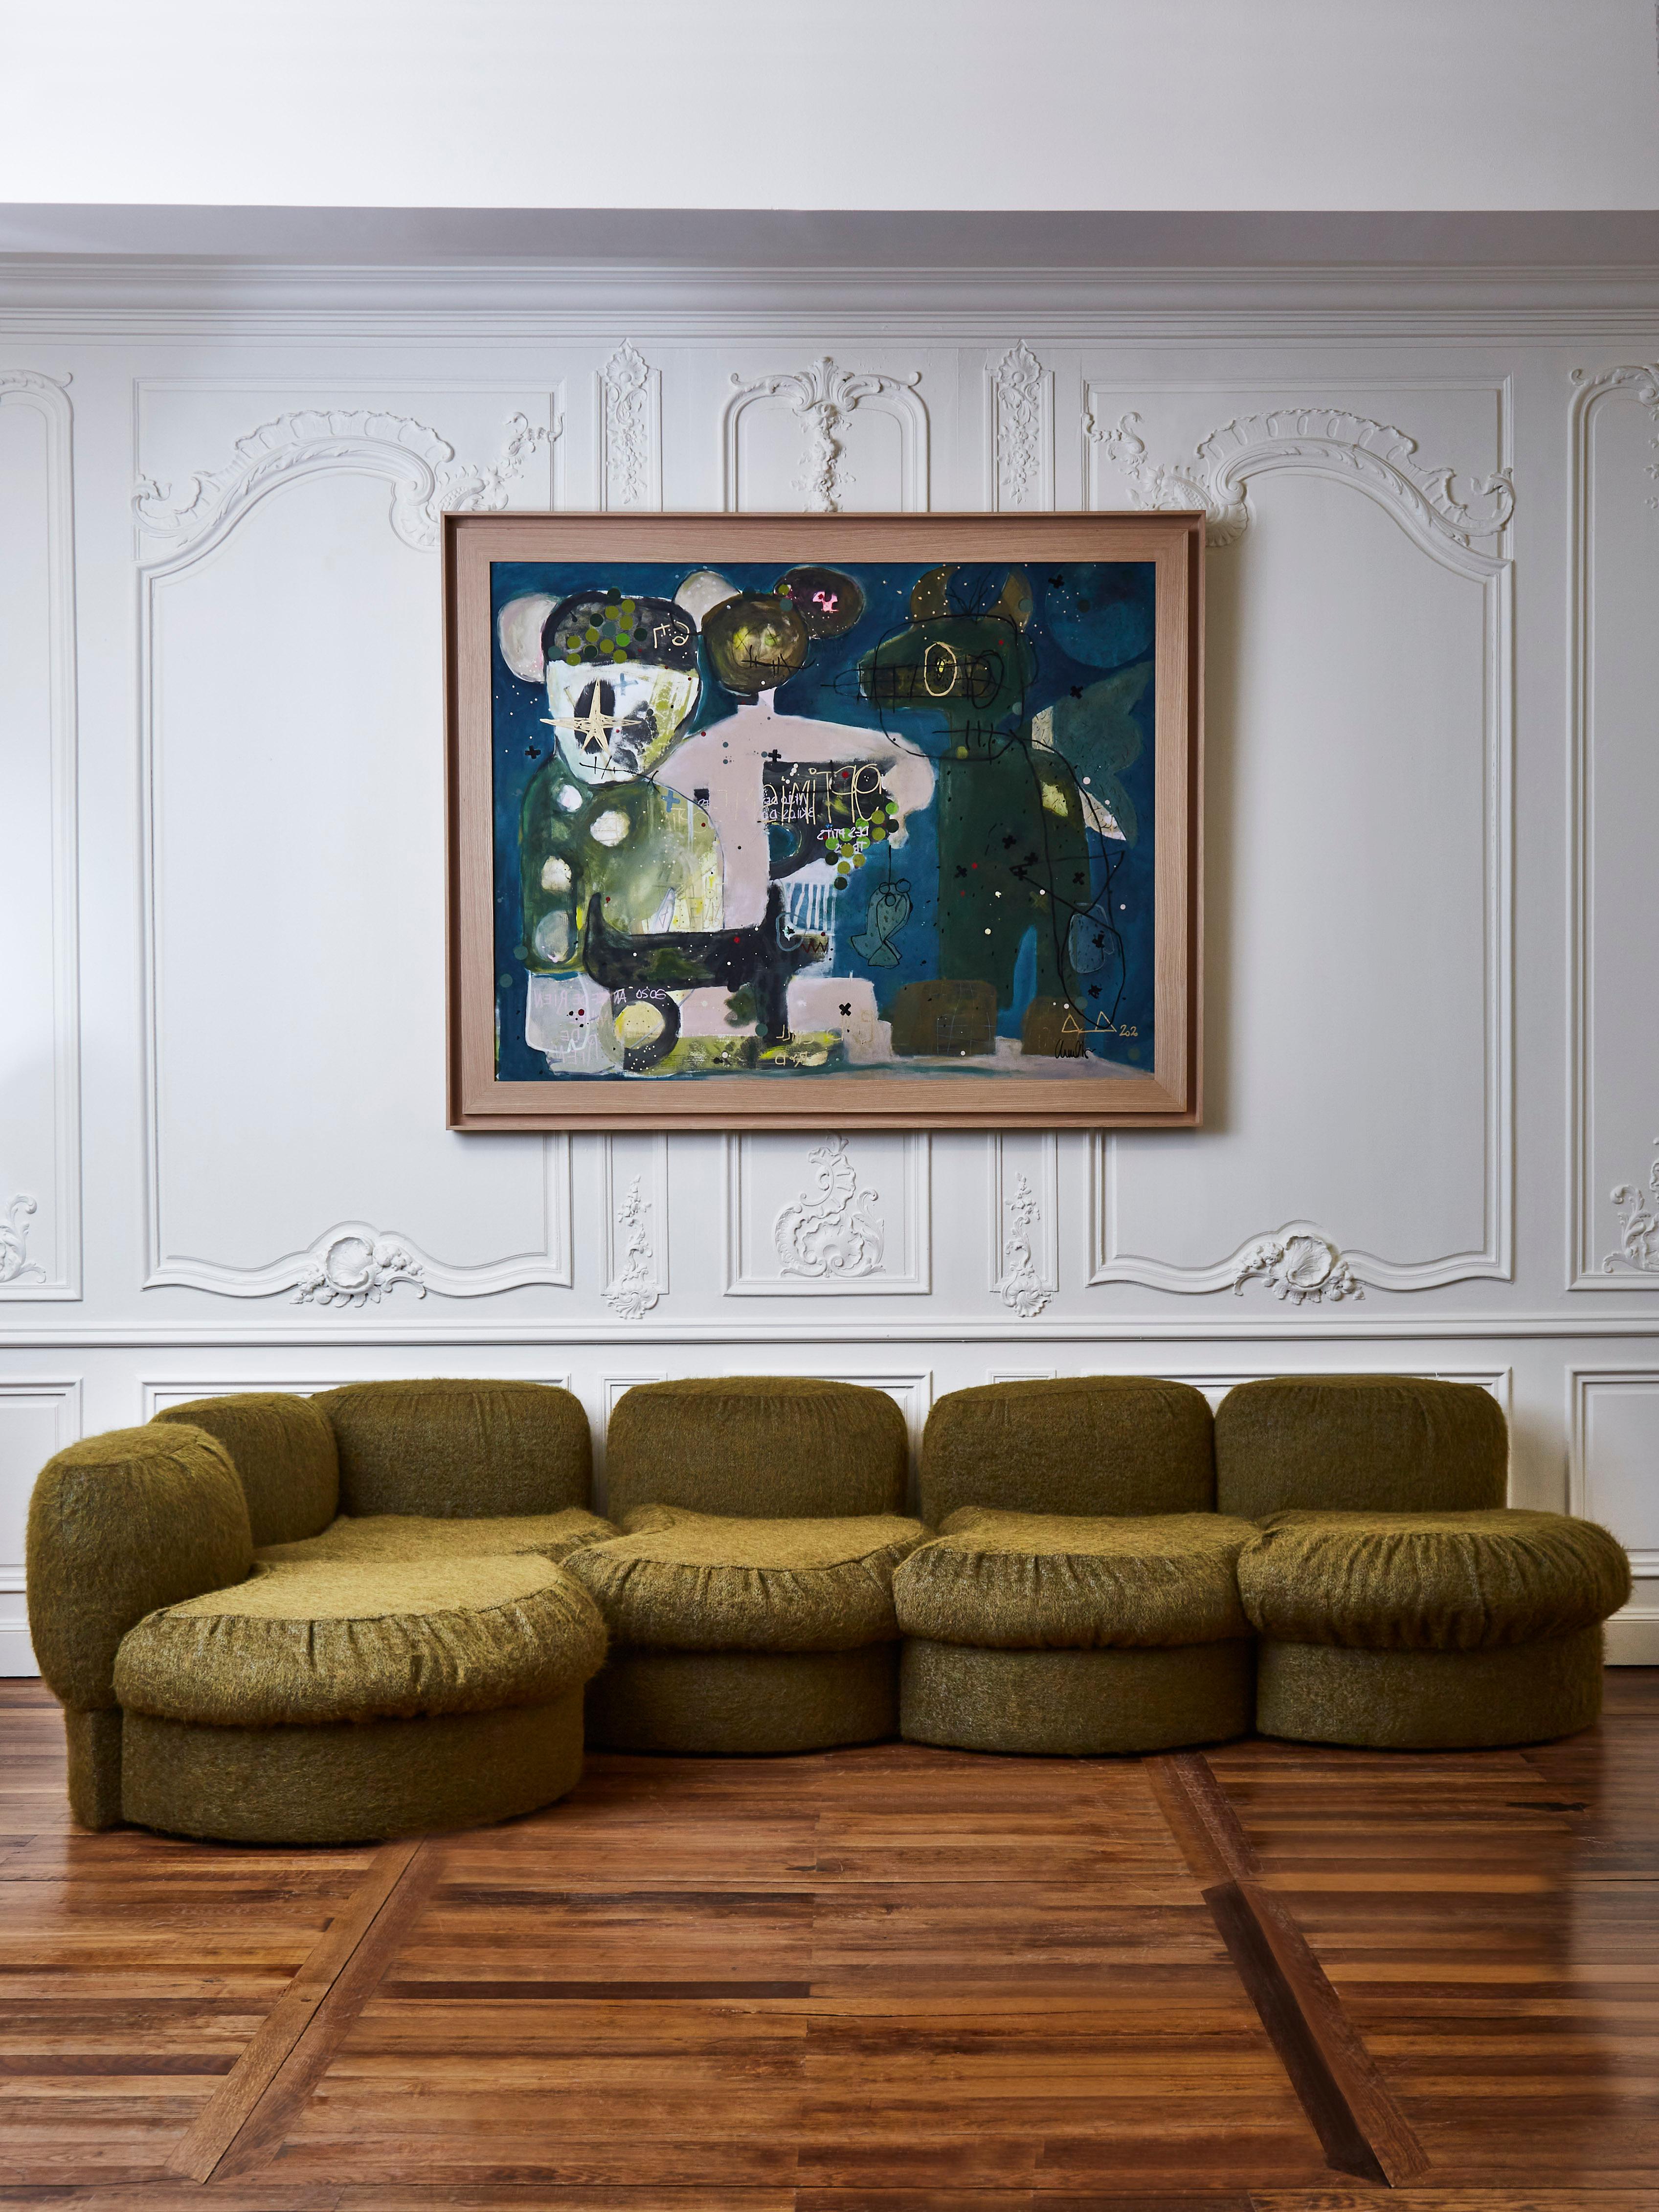 Modular sofa TECNOSALOTTO, entirely restored and reupholstered with a mohair fabric by Pierre Frey.
Italy, 1970s.